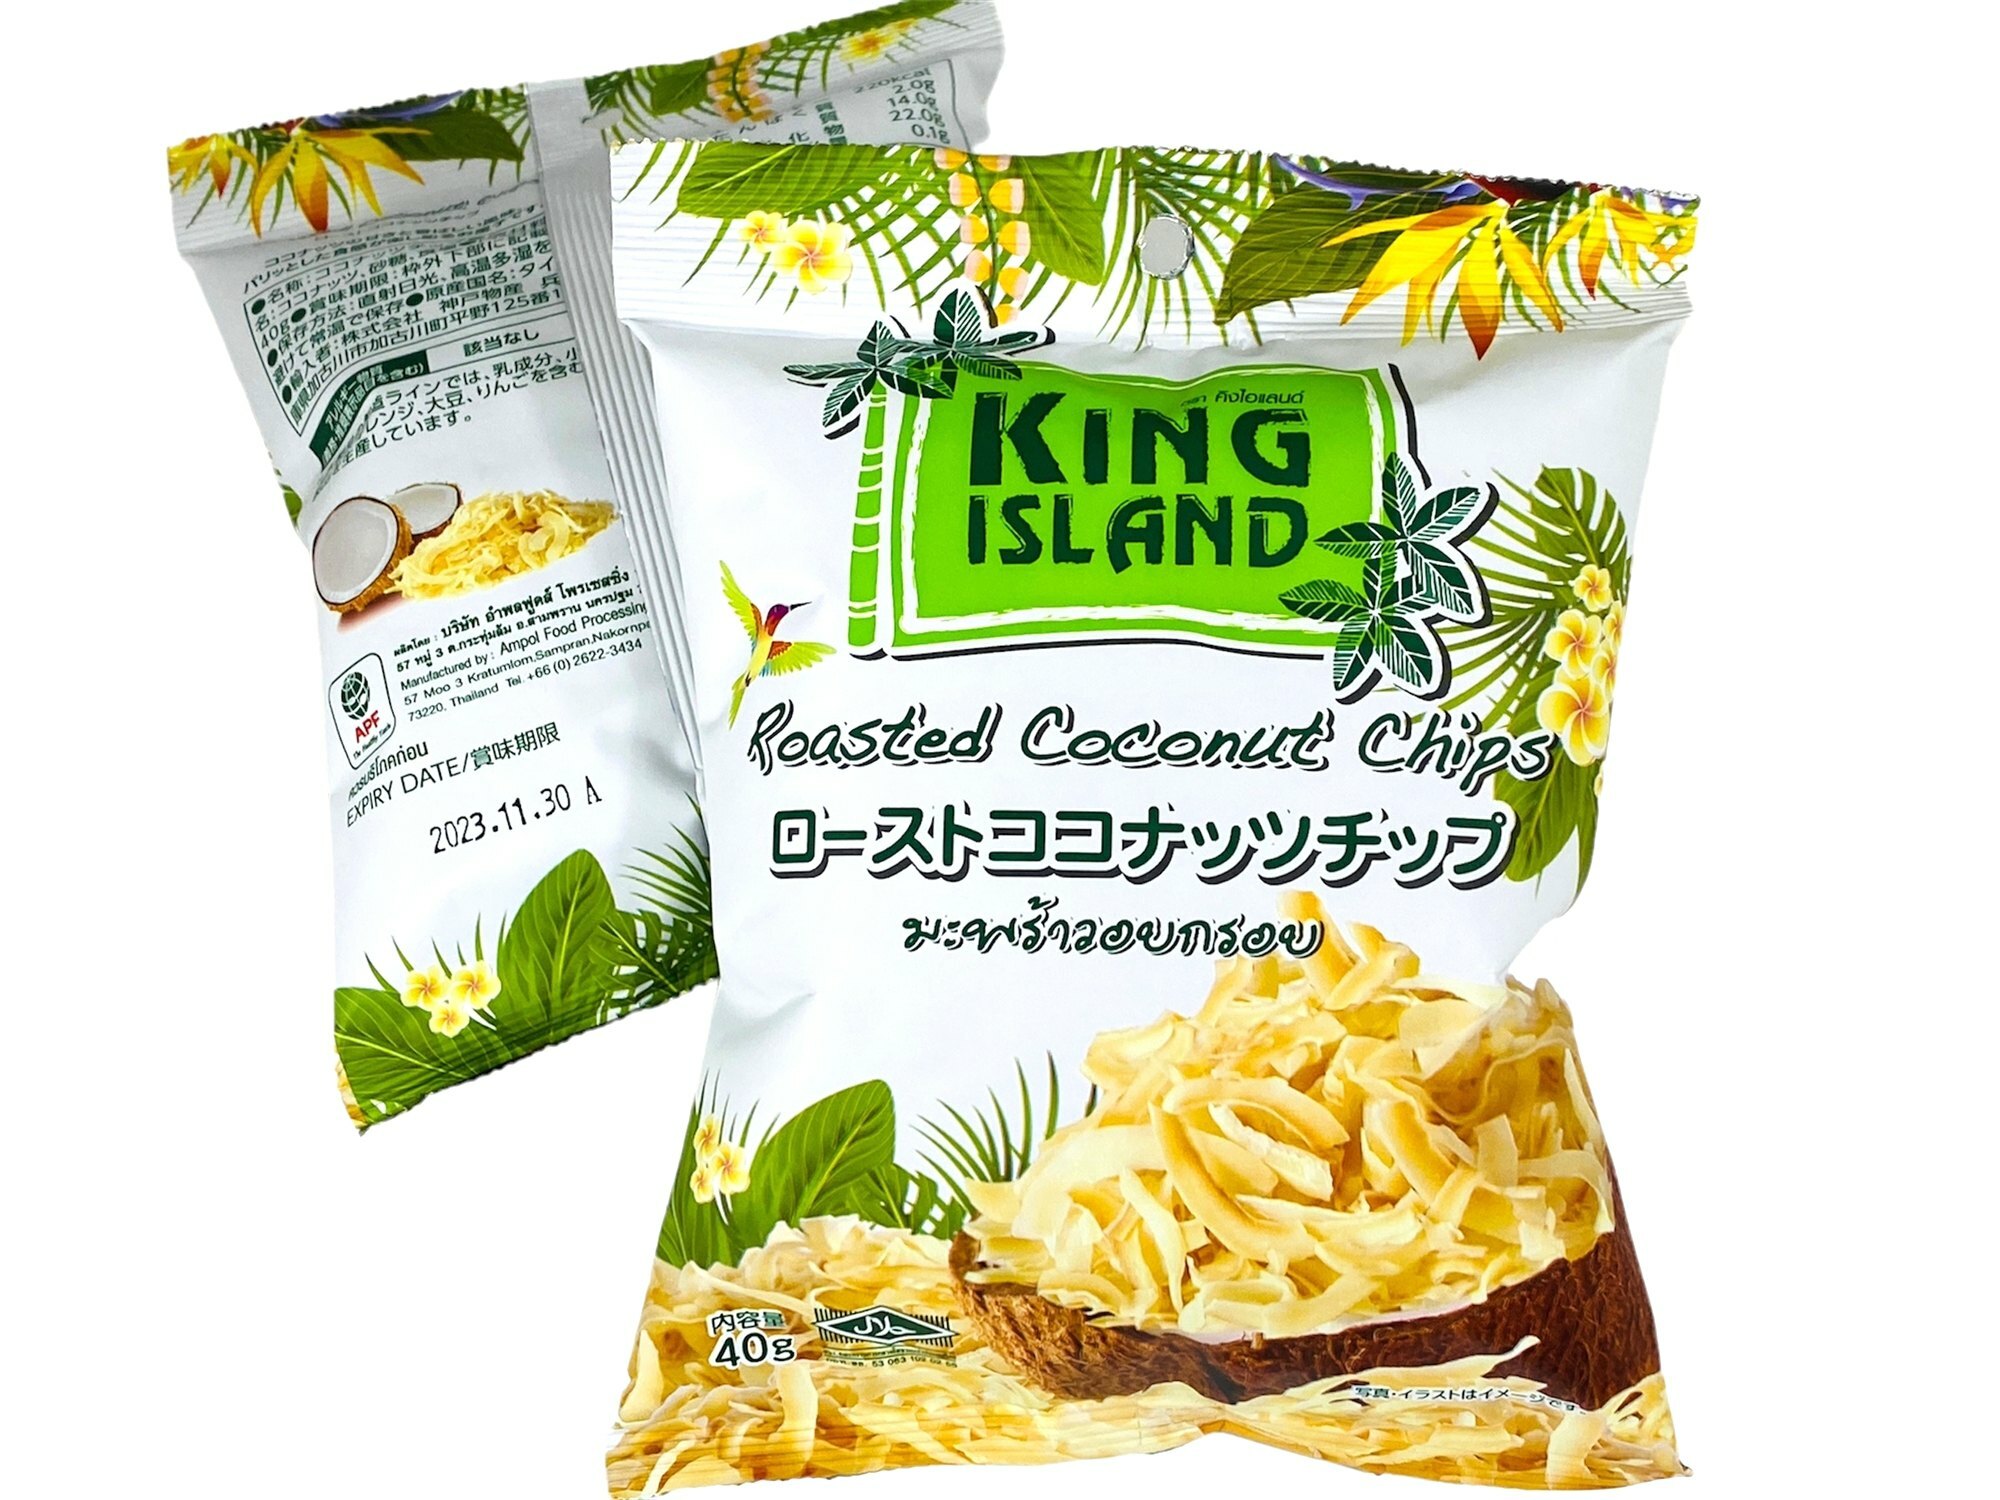 King Island Roasted Coconut Chips